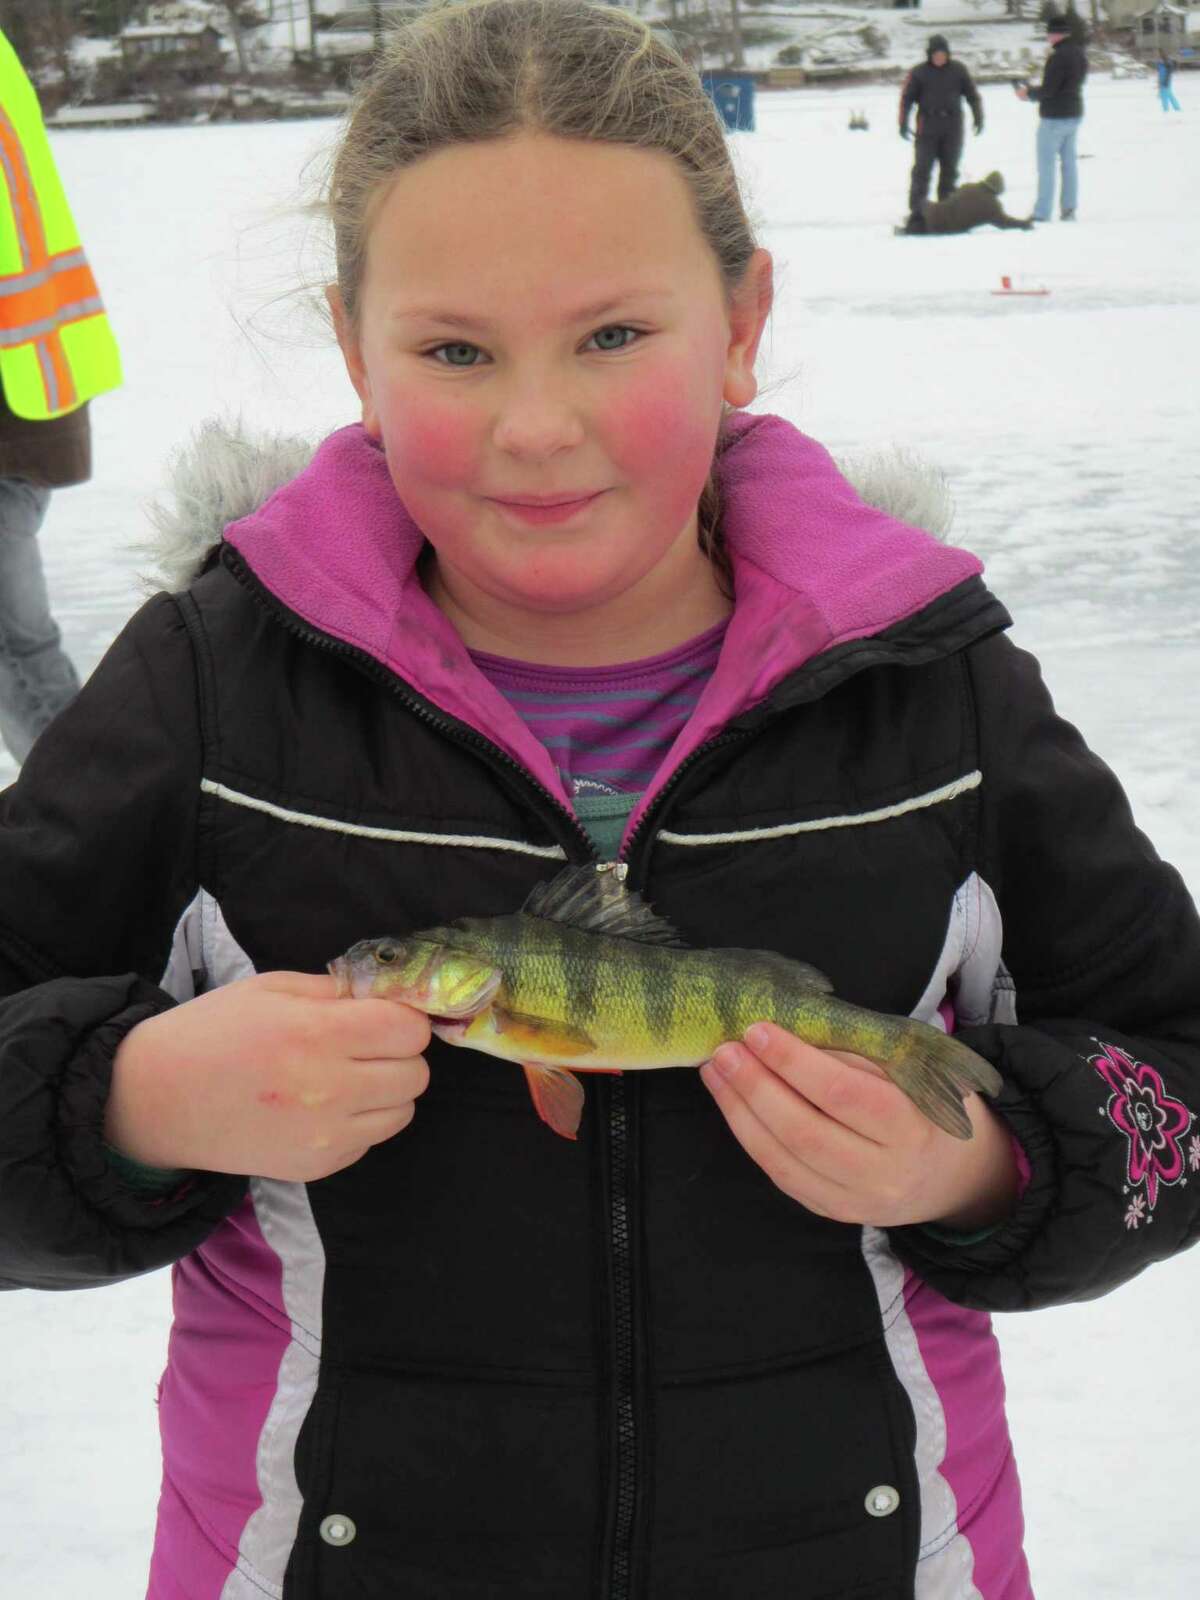 A rosy-cheeked ice angler shows off what she caught during an ice fishing event held by Connecticut’s Department of Energy and Environmental Protection. Beauchene, who lives in Barkhamsted, said ice fishing helps cure that restless feeling folks get when they’ve been cooped up inside too long. He said it’s great to be out on a beautiful winter day with family and friends, when skies are blue and the sun is warm, and you can “maybe even catch a fish.” But he warned the experience can be “unnerving for some” because ice expands as the day heats up and there are often large “booms.” They may make you think the ice is going to break, he said, but as long as you have a solid four inches or more, it will be fine. Beauchene’s best advice for first-timers is to sign up for Connecticut’s free “Learn to Ice Fish” class (via Zoom), “then come out on one of our small group personalized instruction ice fishing trips. See: https://bit.ly/3rjbwZ8.